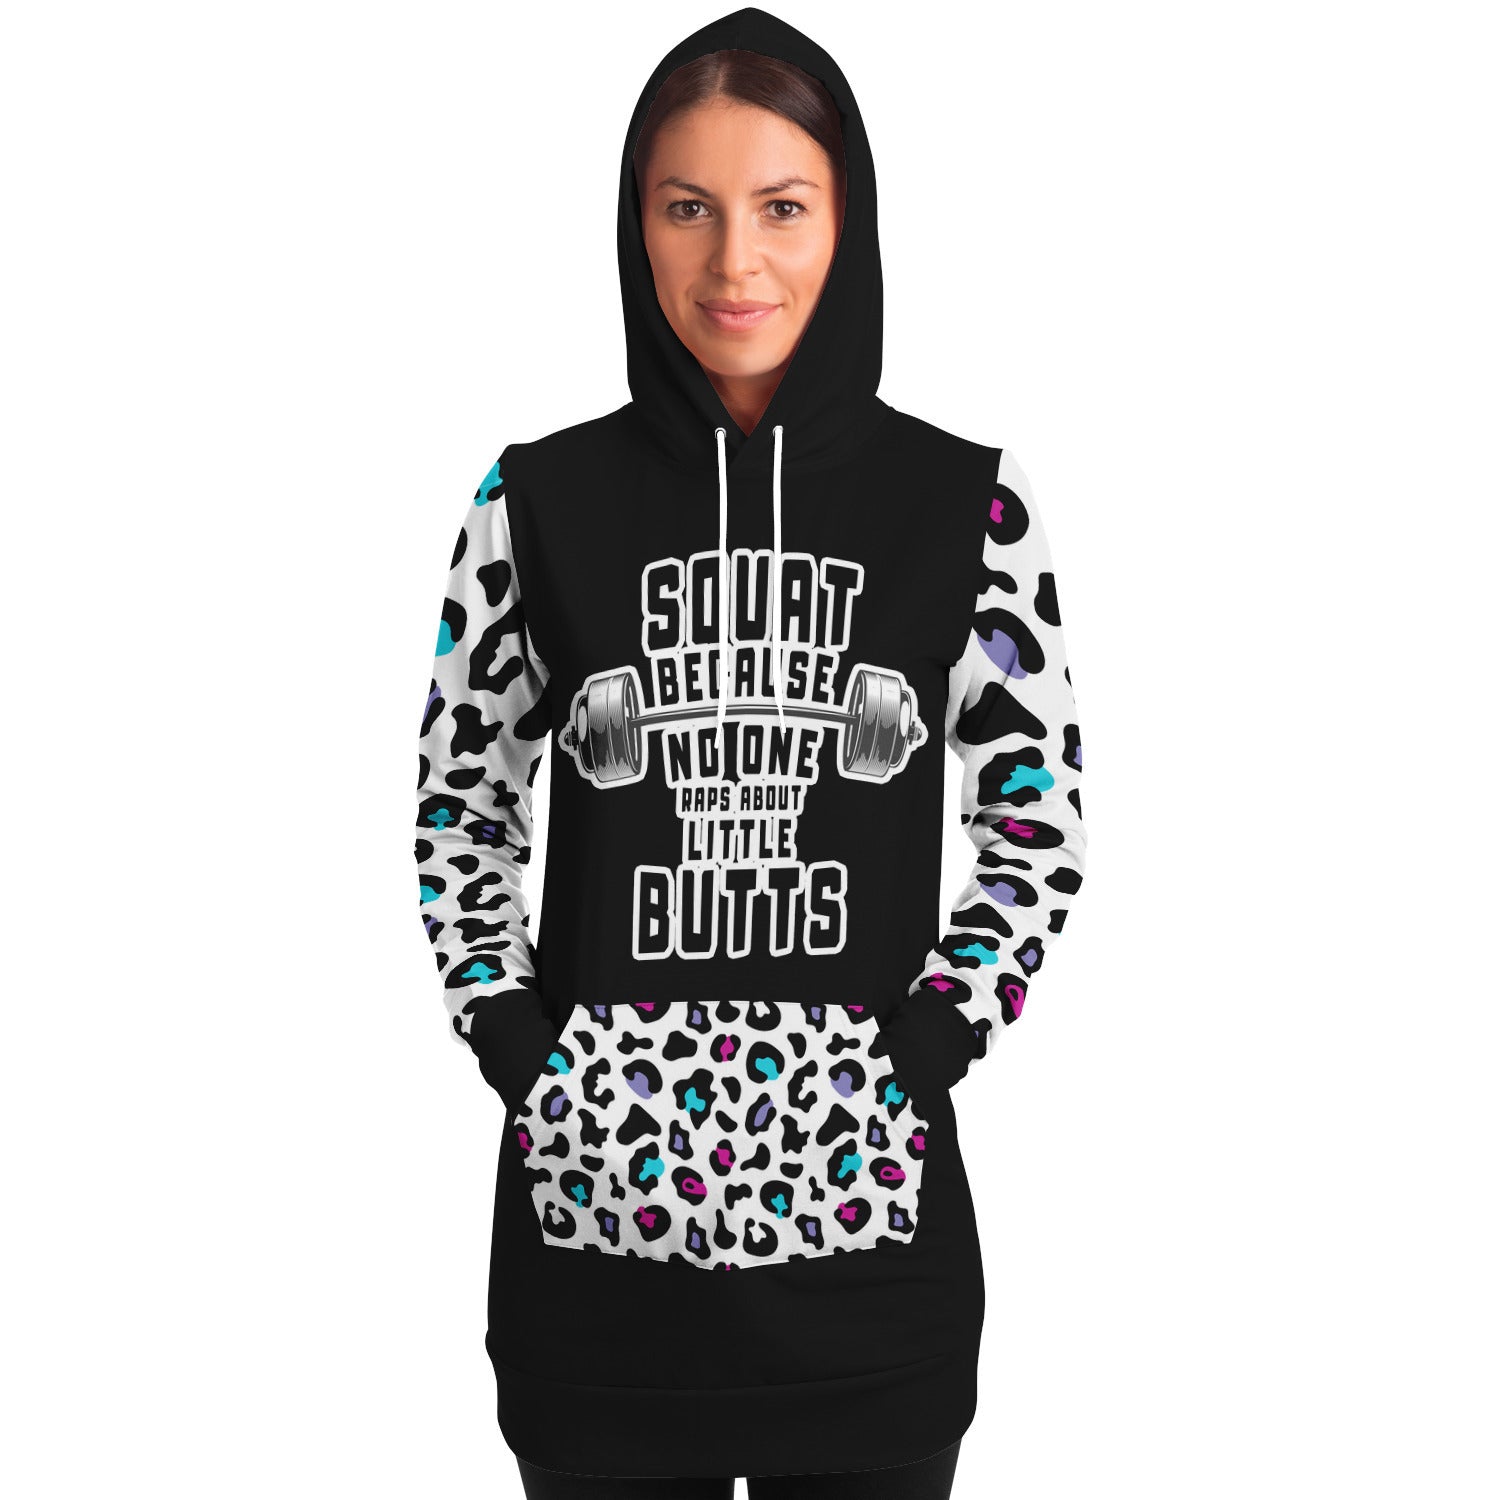 "Squat because no one raps about LITTLE BUTTS" Women's Colorful Leopard Print Long Hoodie